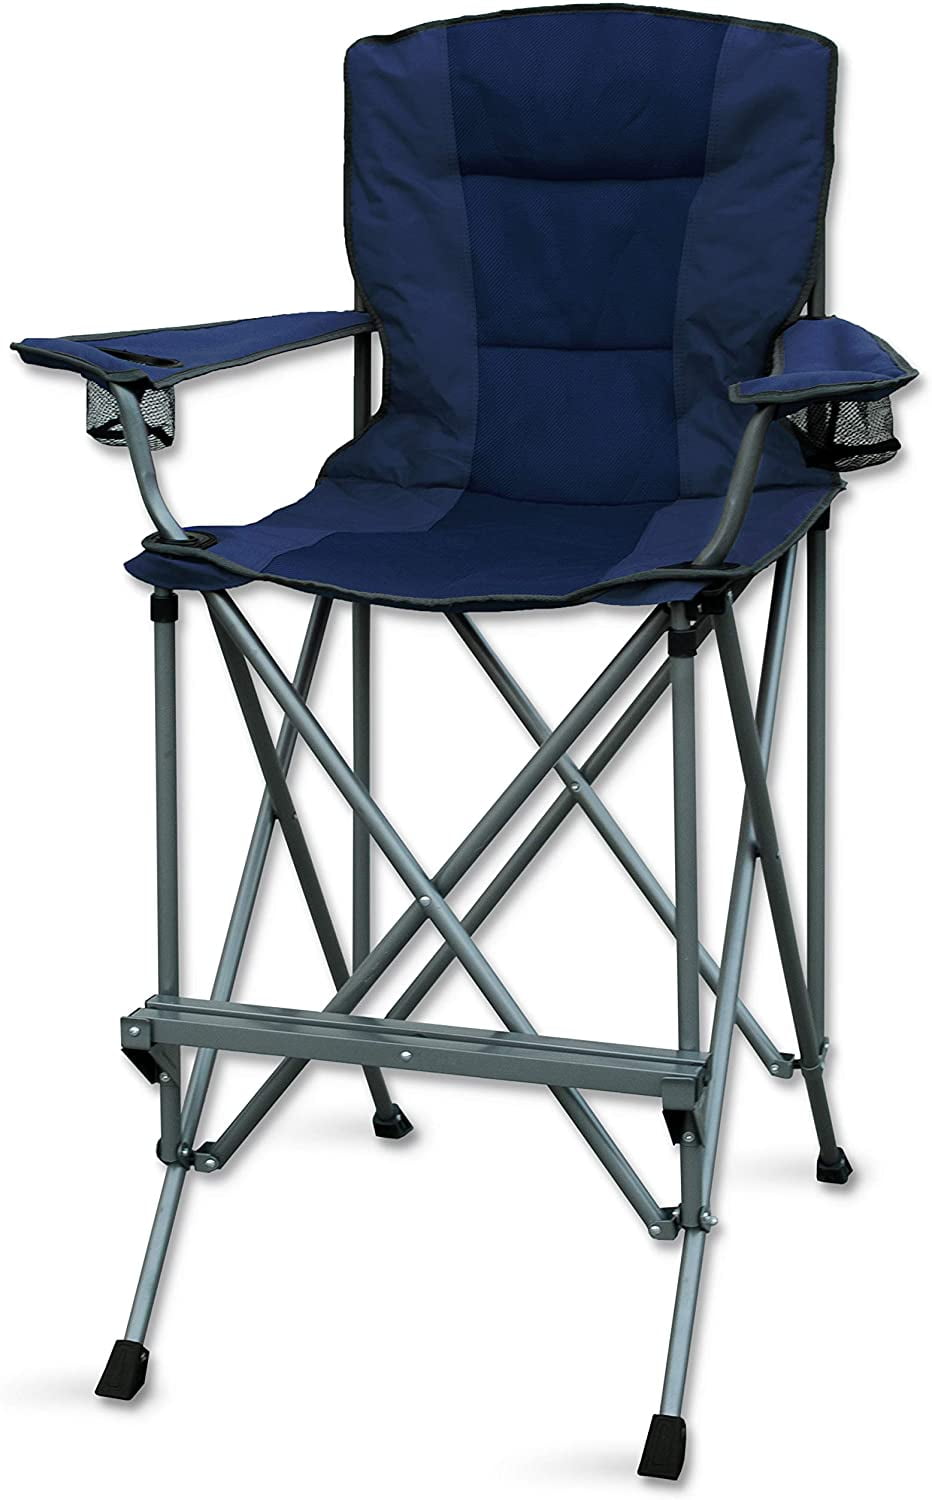 Oversized Camping Chair Lounge Big Director Tall Outdoor Folding Portable Brown for sale online 